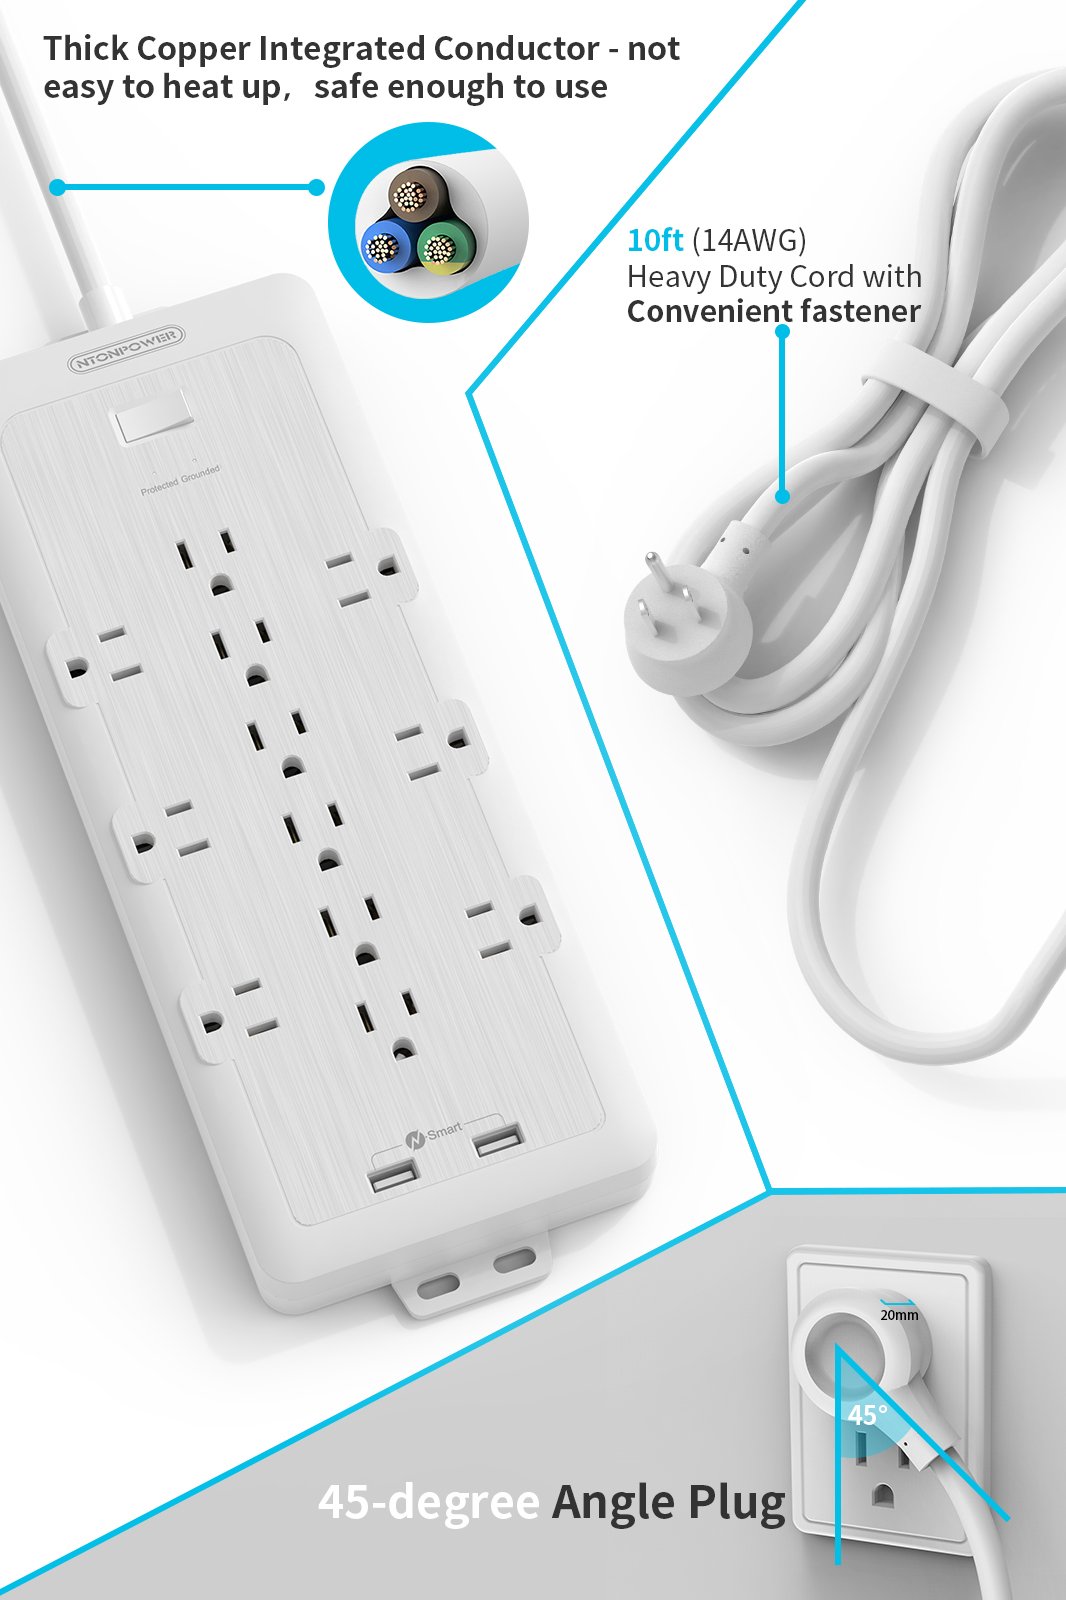 Ntonpower SurgePro  12 Outlets 2 USB 4000 Joules